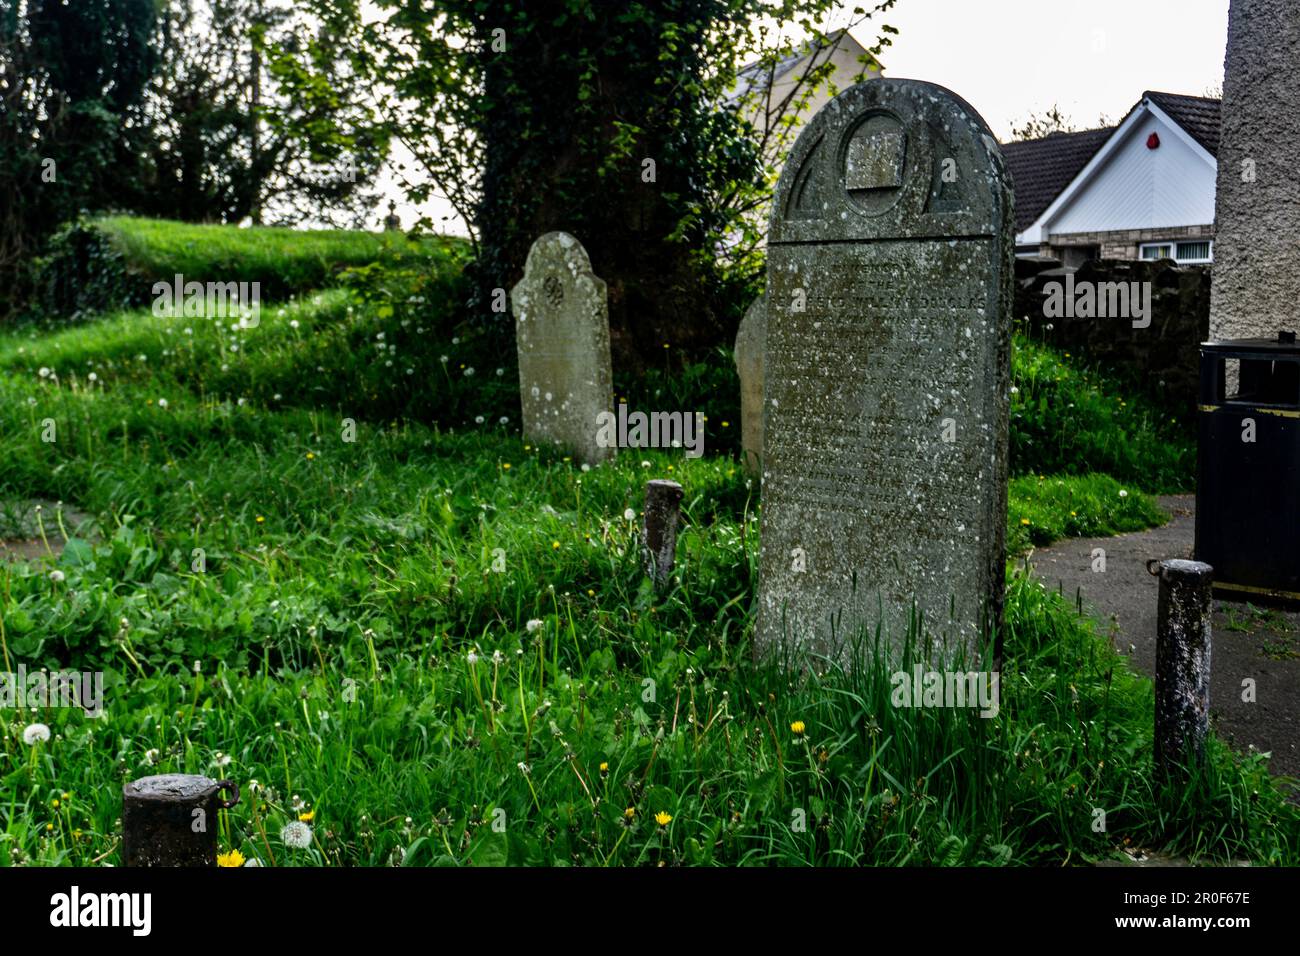 The old graveyard in the centre of Irvinestown, Co Fermanagh, Nnorthern Ireland. The graveyard dates back to the 18th century. Stock Photo